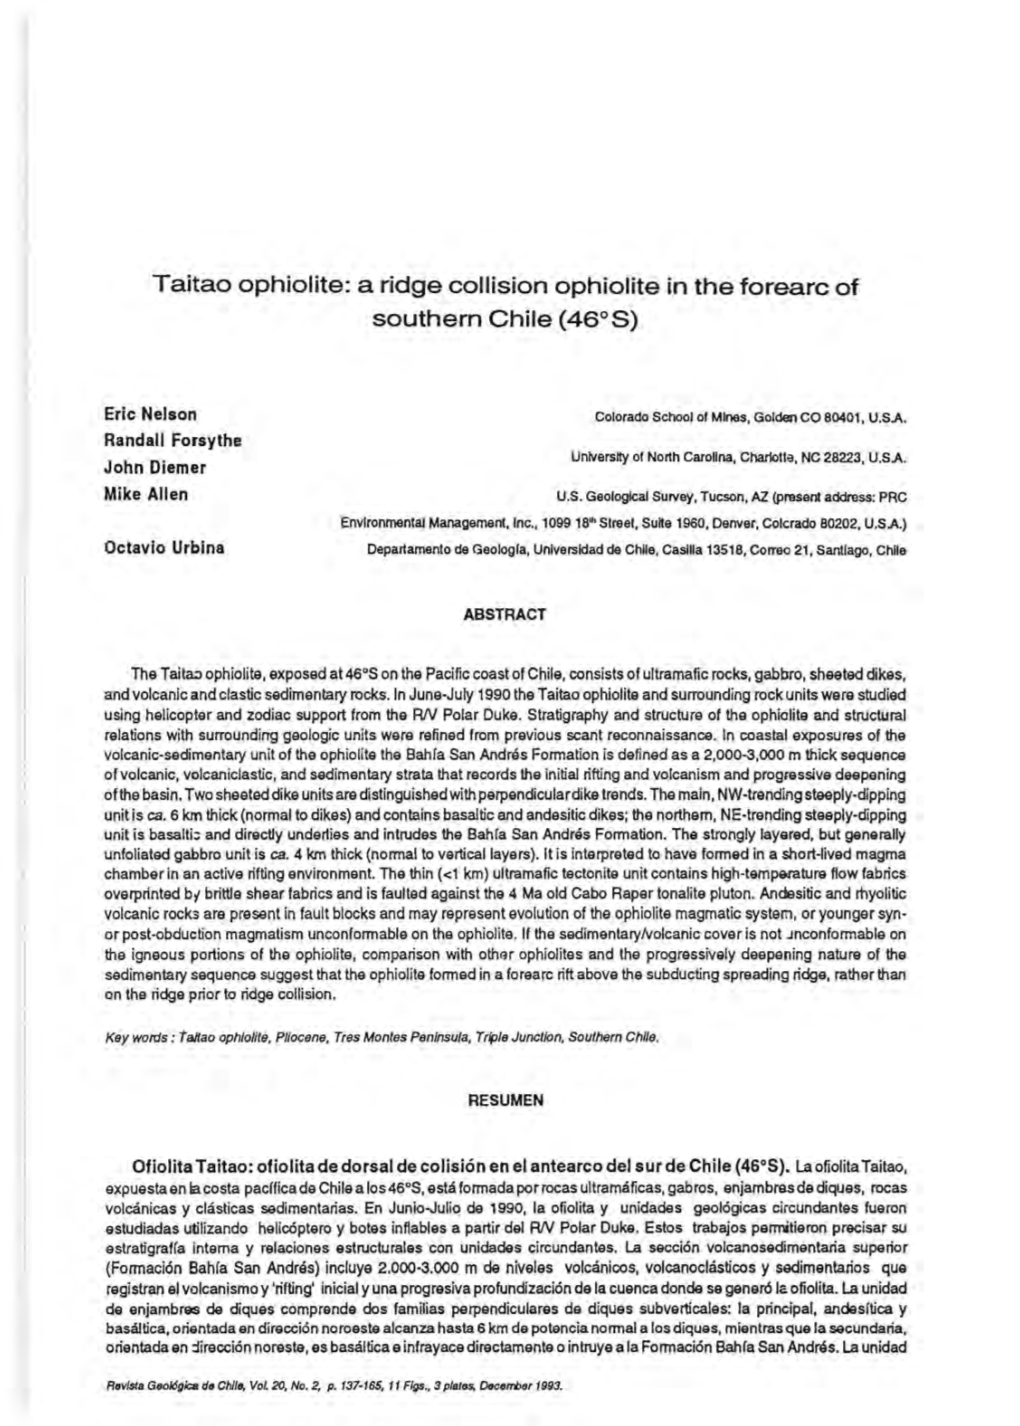 Taitao Ophiolite: a Ridge Eollision Ophiolite in the Toreare of Southern Chile (460 S)